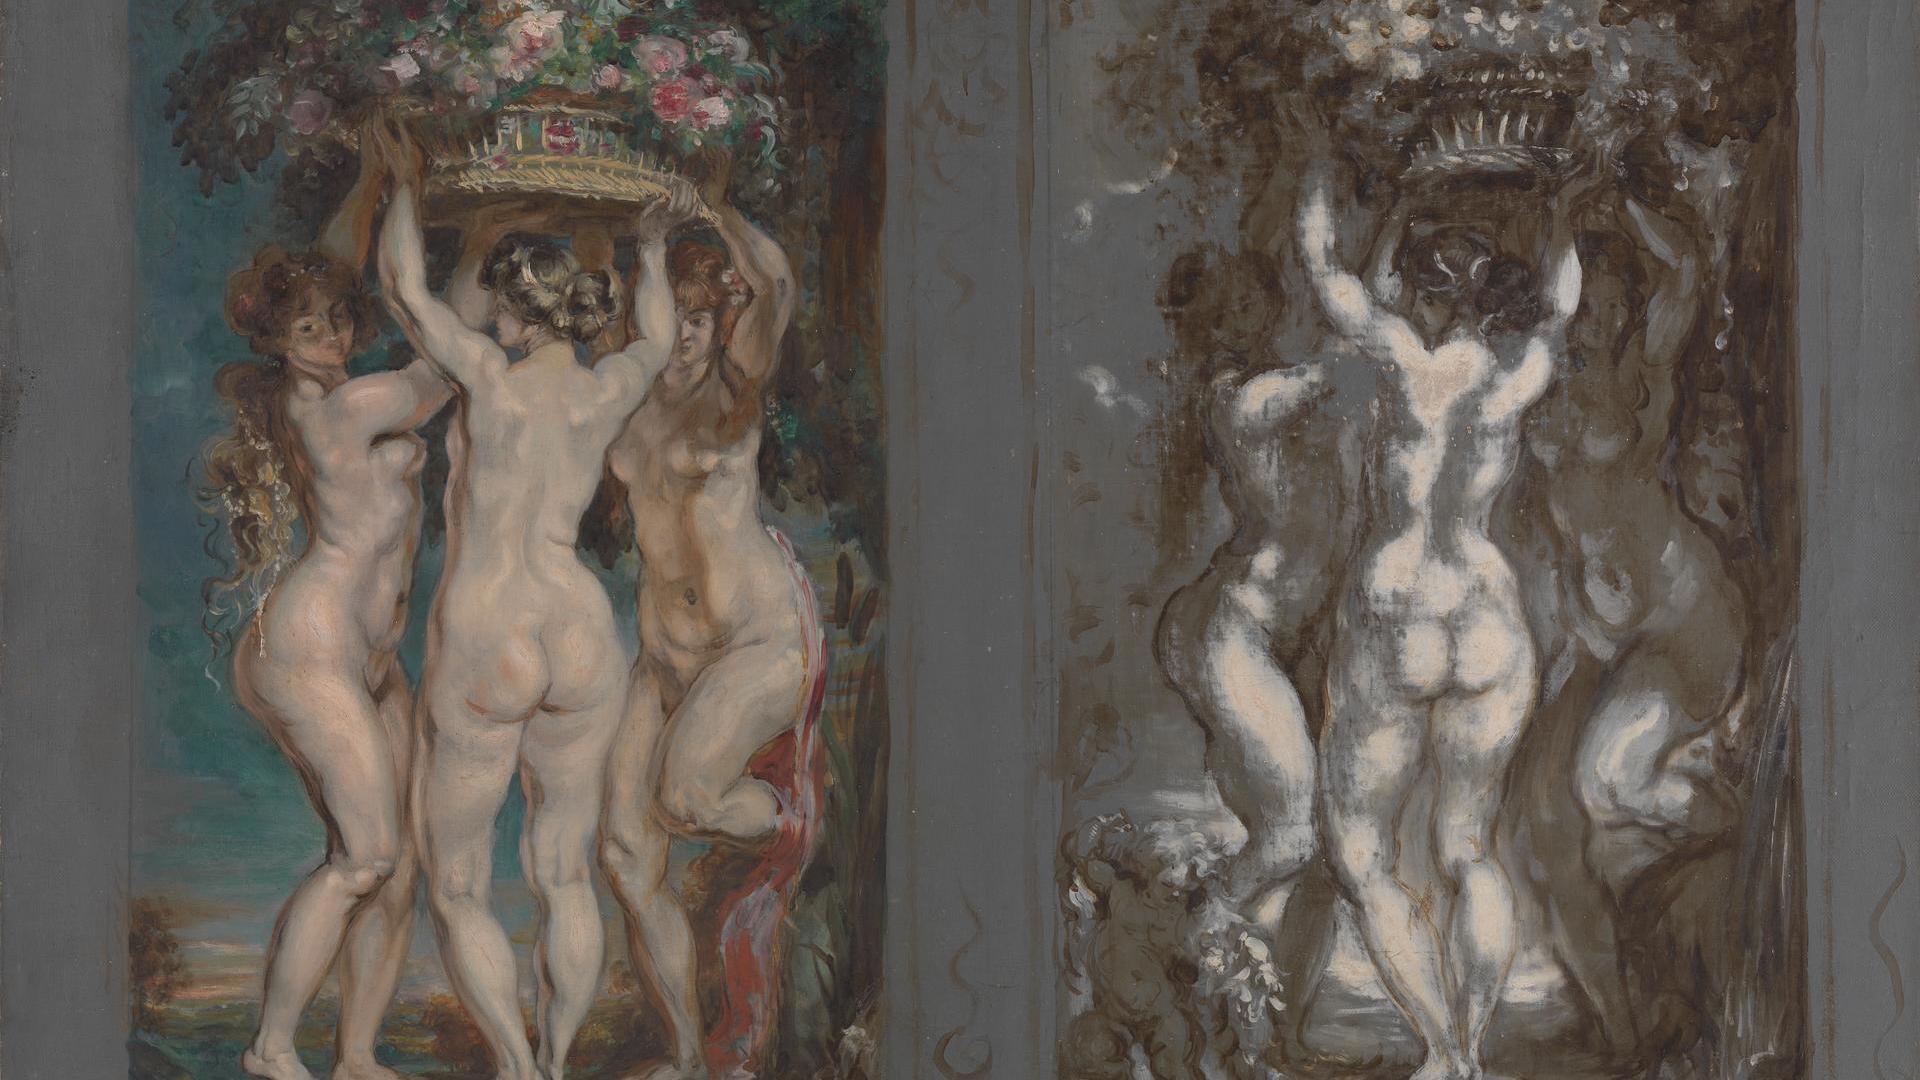 Two Studies for 'The Three Graces' by Louis Anquetin